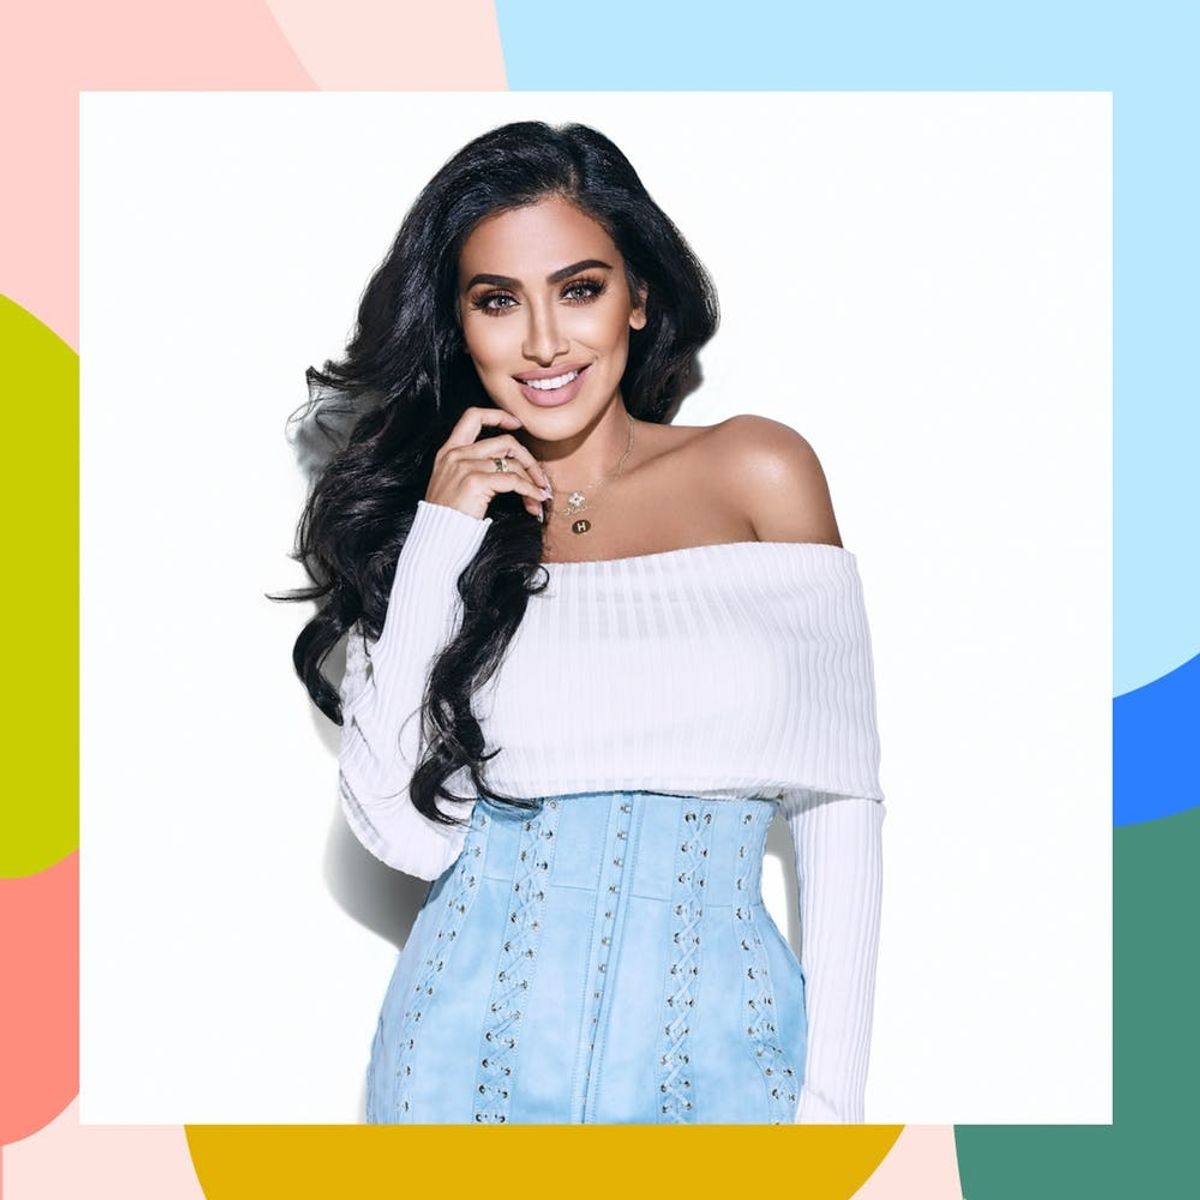 Huda Kattan’s Latest Makeup Challenge Takes Place in an Elevator